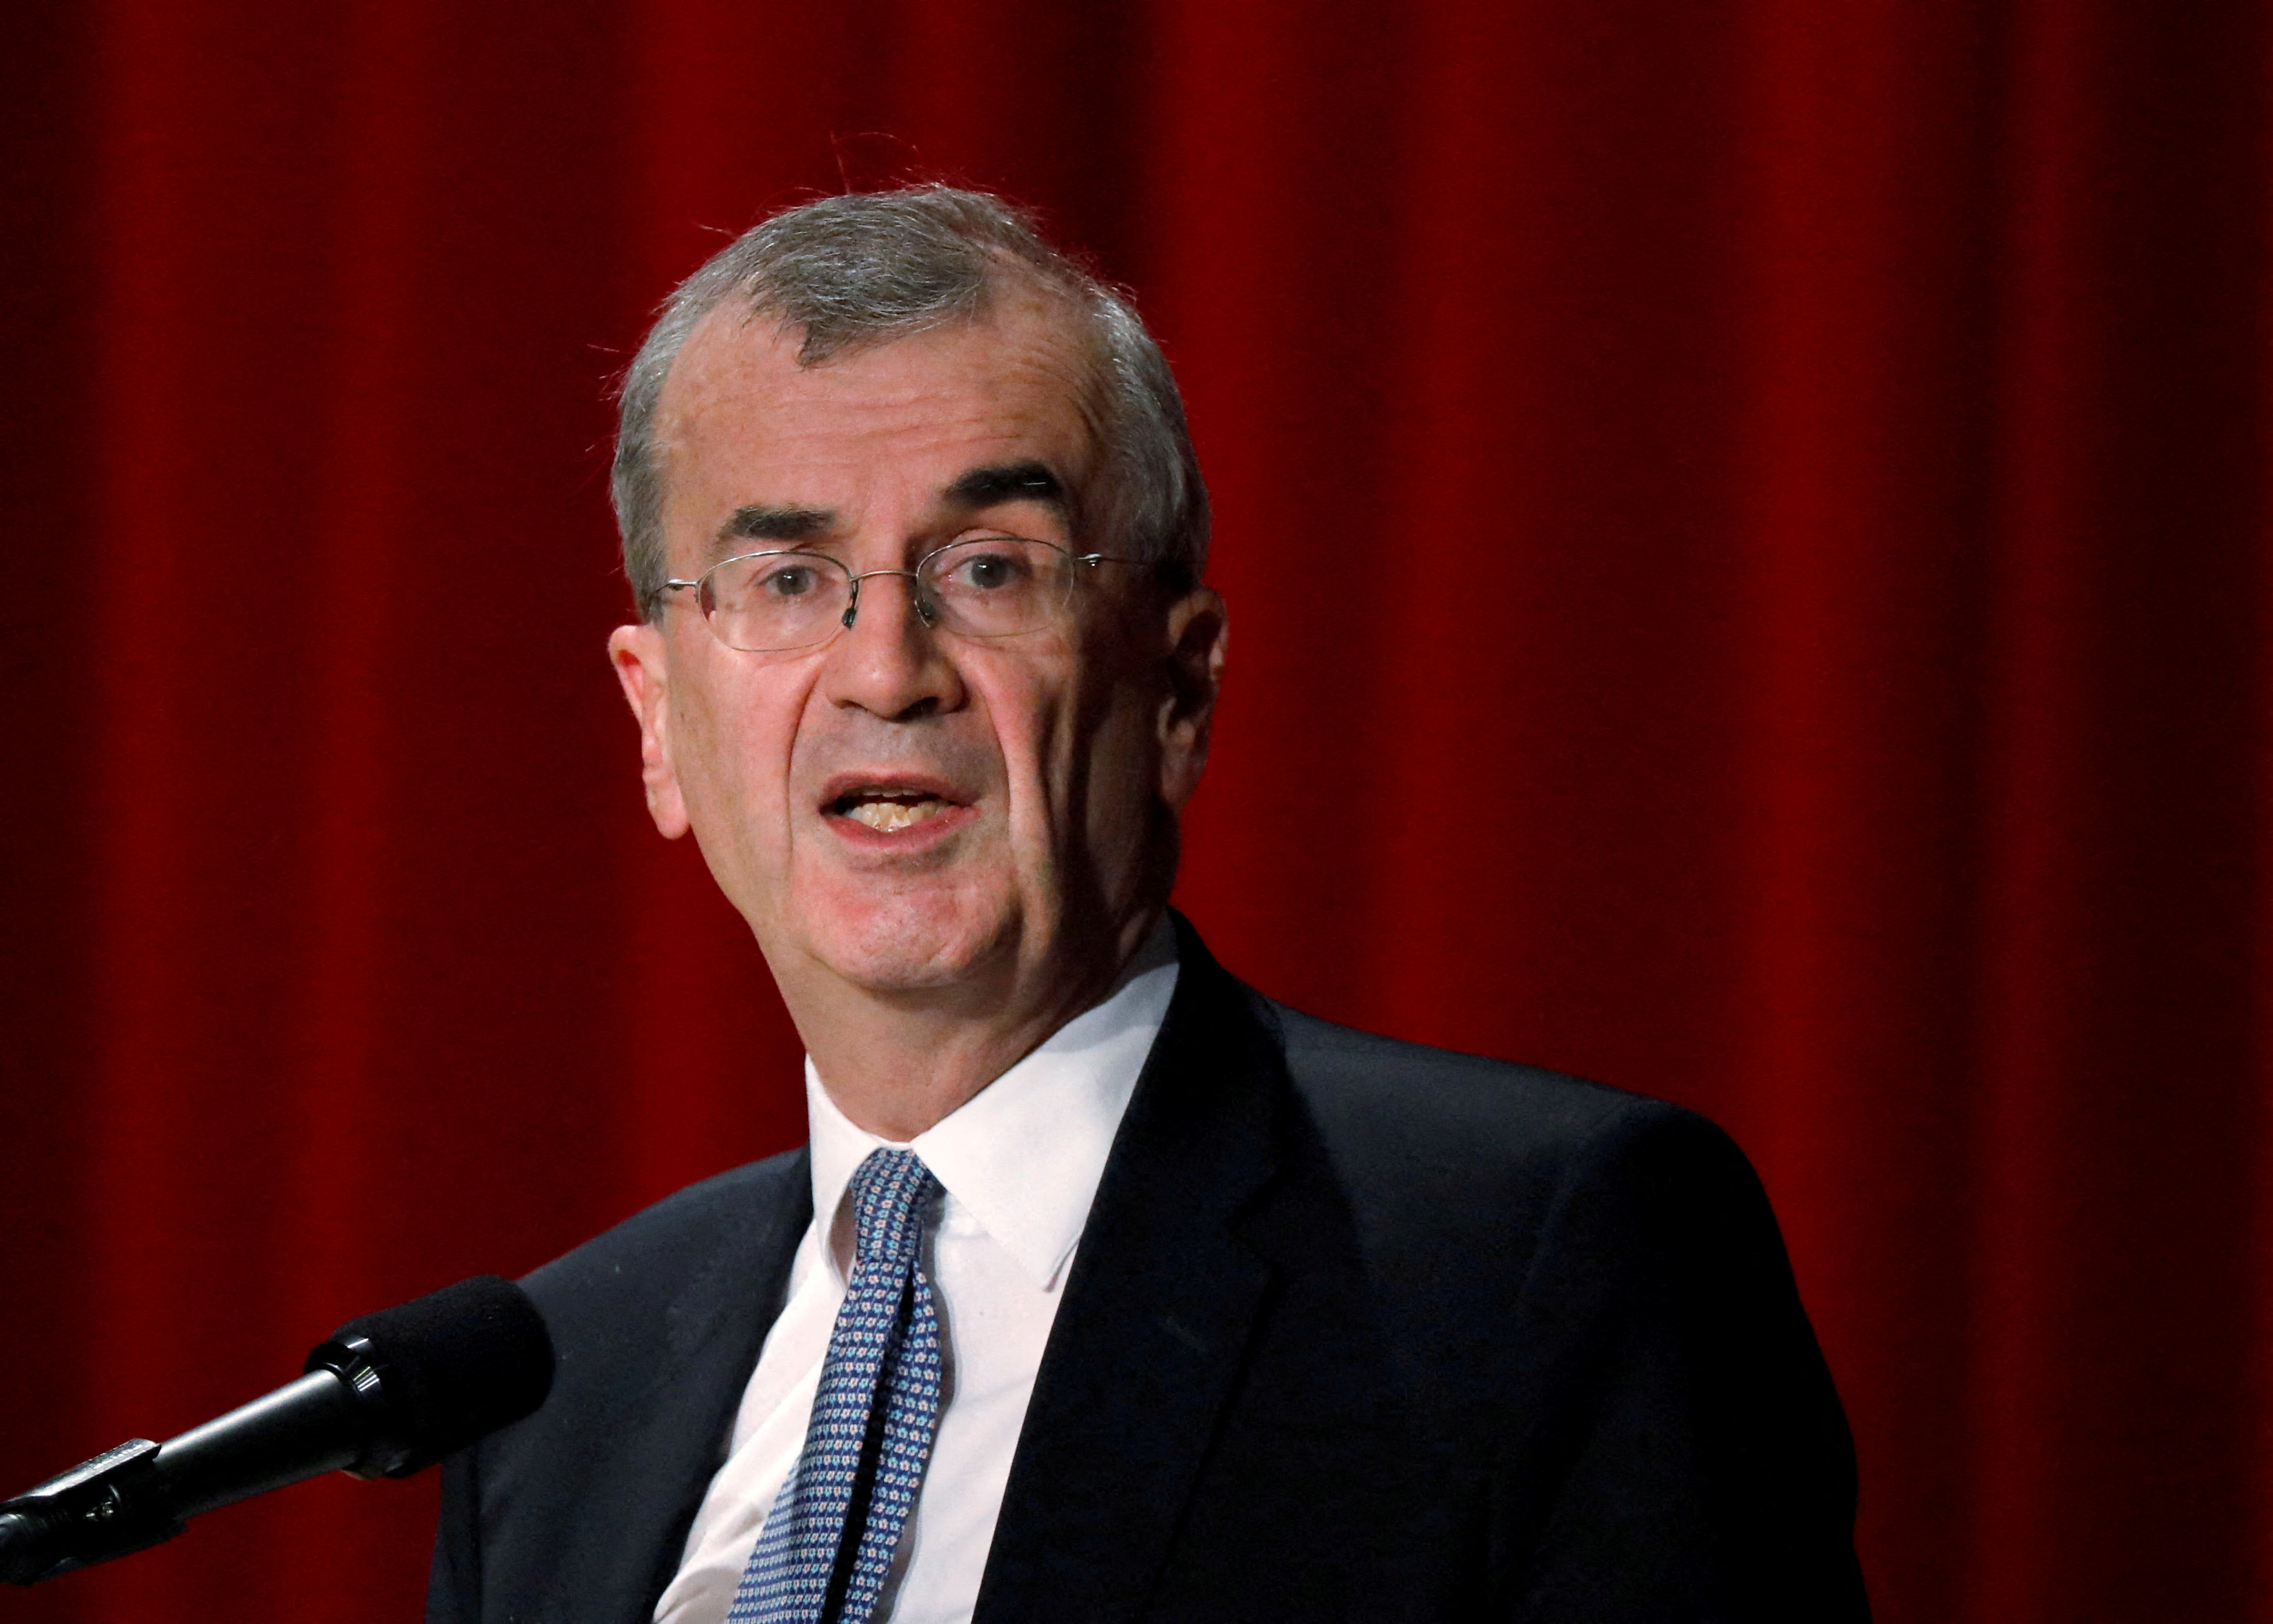 ECB policymaker Villeroy de Galhau, who is also governor of the French central bank, attends the Paris Europlace International Financial Forum in Tokyo